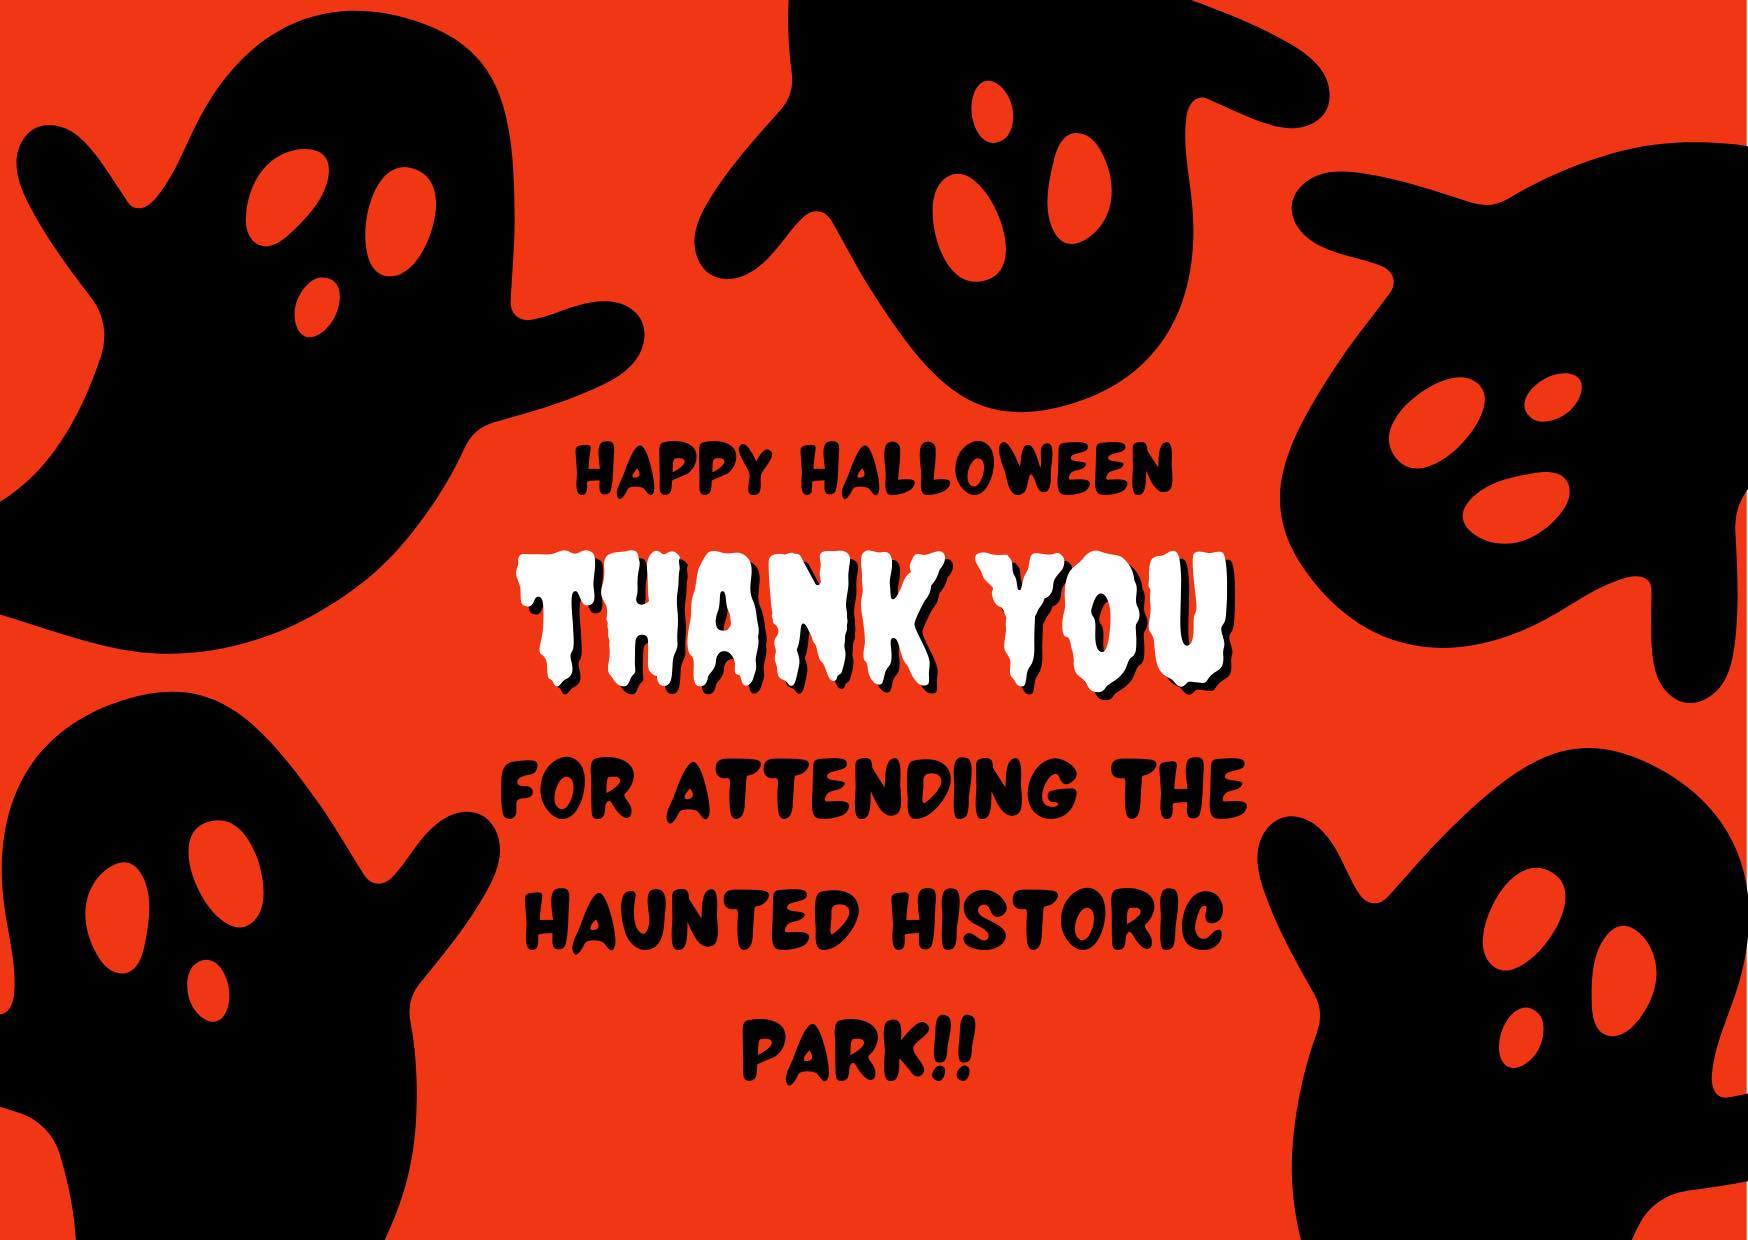 Haunted Historic Park Thank You